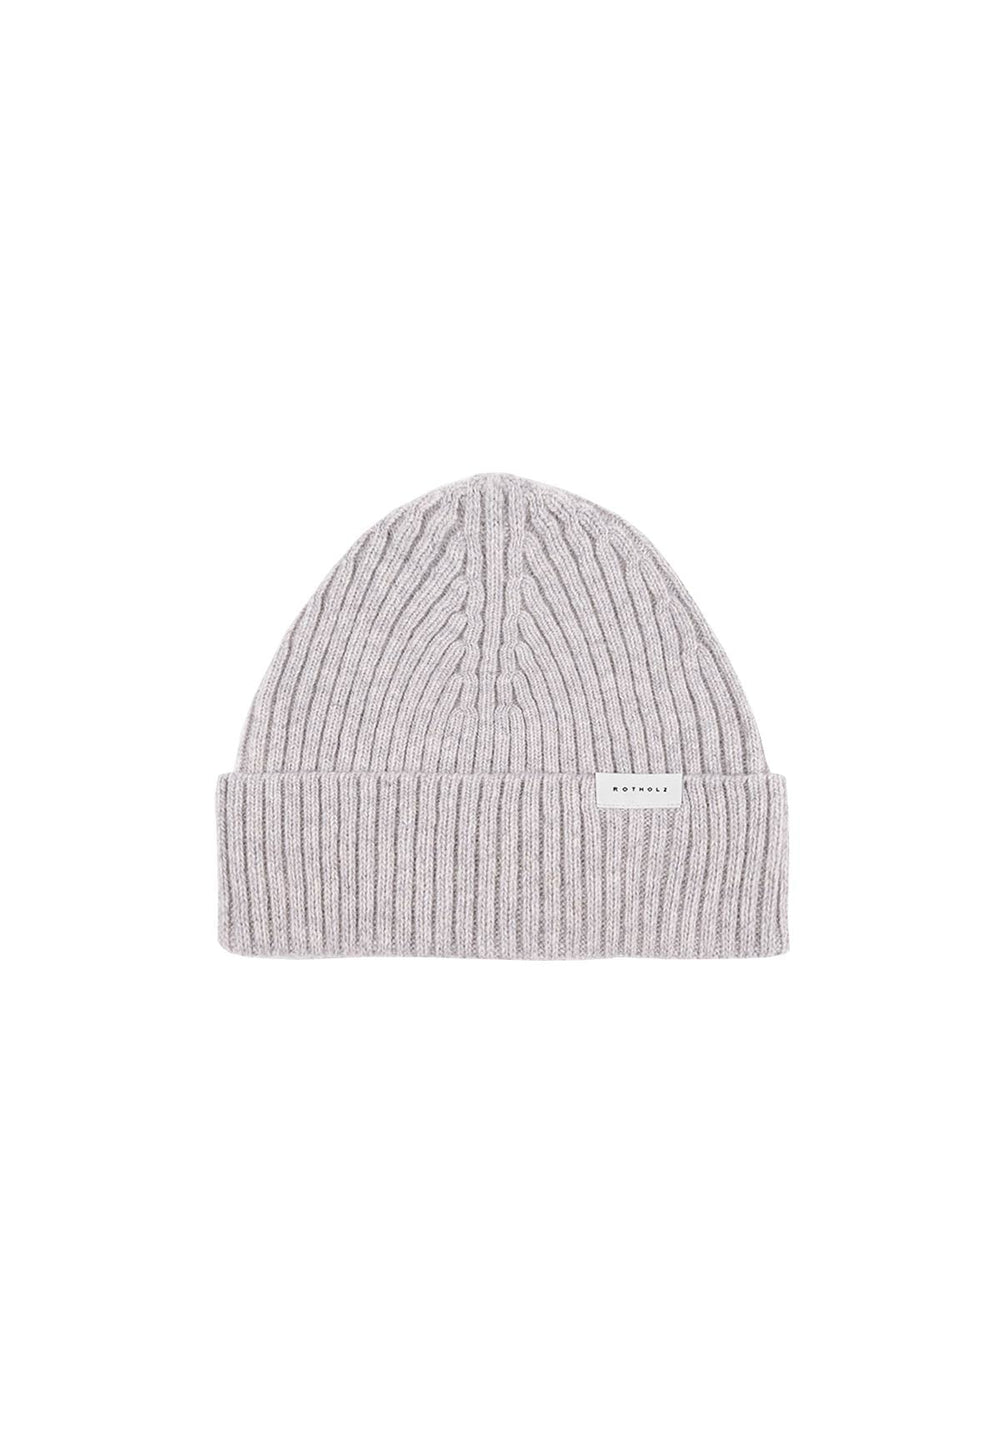 Product photo of a ribbed beanie in light grey.